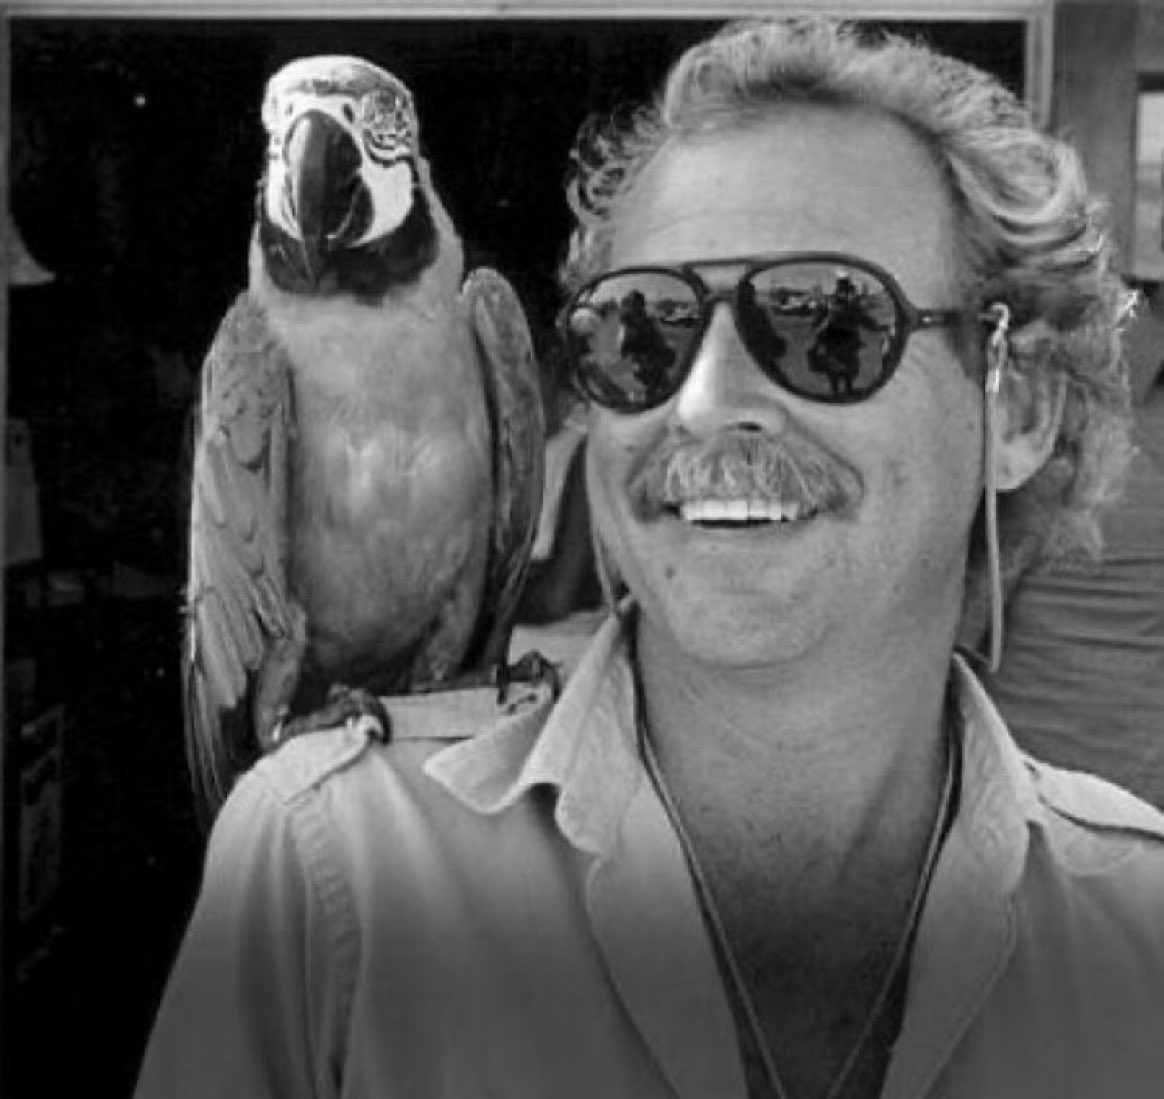 Super Sky Point to Jimmy Buffett, who wrote one of the great lines in music history: “I blew out my flip-flop, stepped on a pop top.” That’s fucking poetry for the common man right there. #RIP